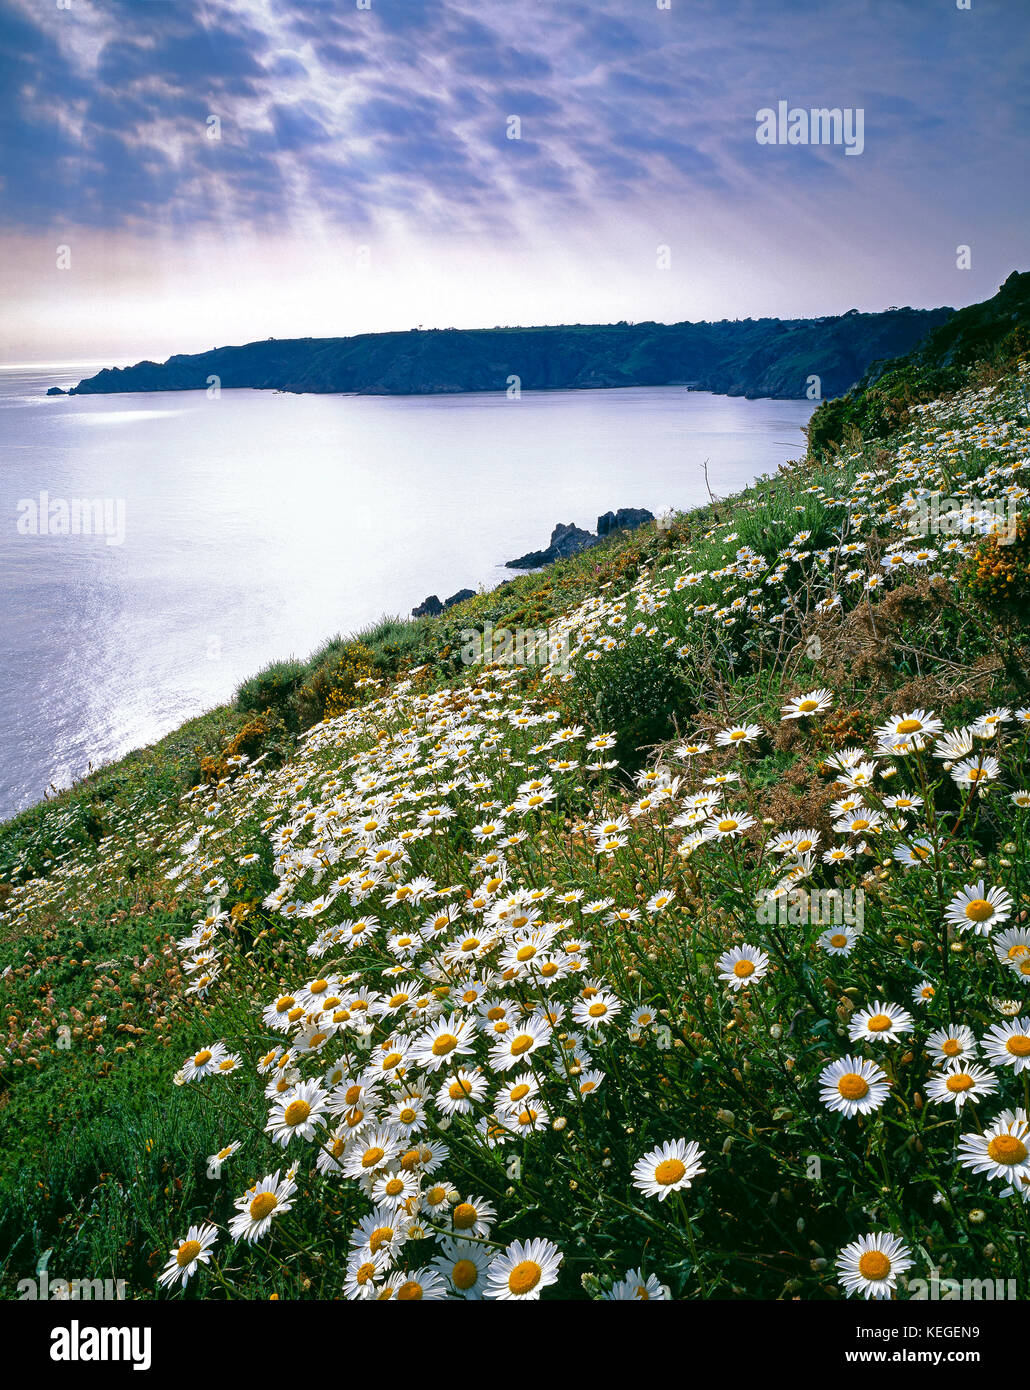 Channel Islands. Guernsey. Scenic coast. Wild flowers on clifftop. Stock Photo